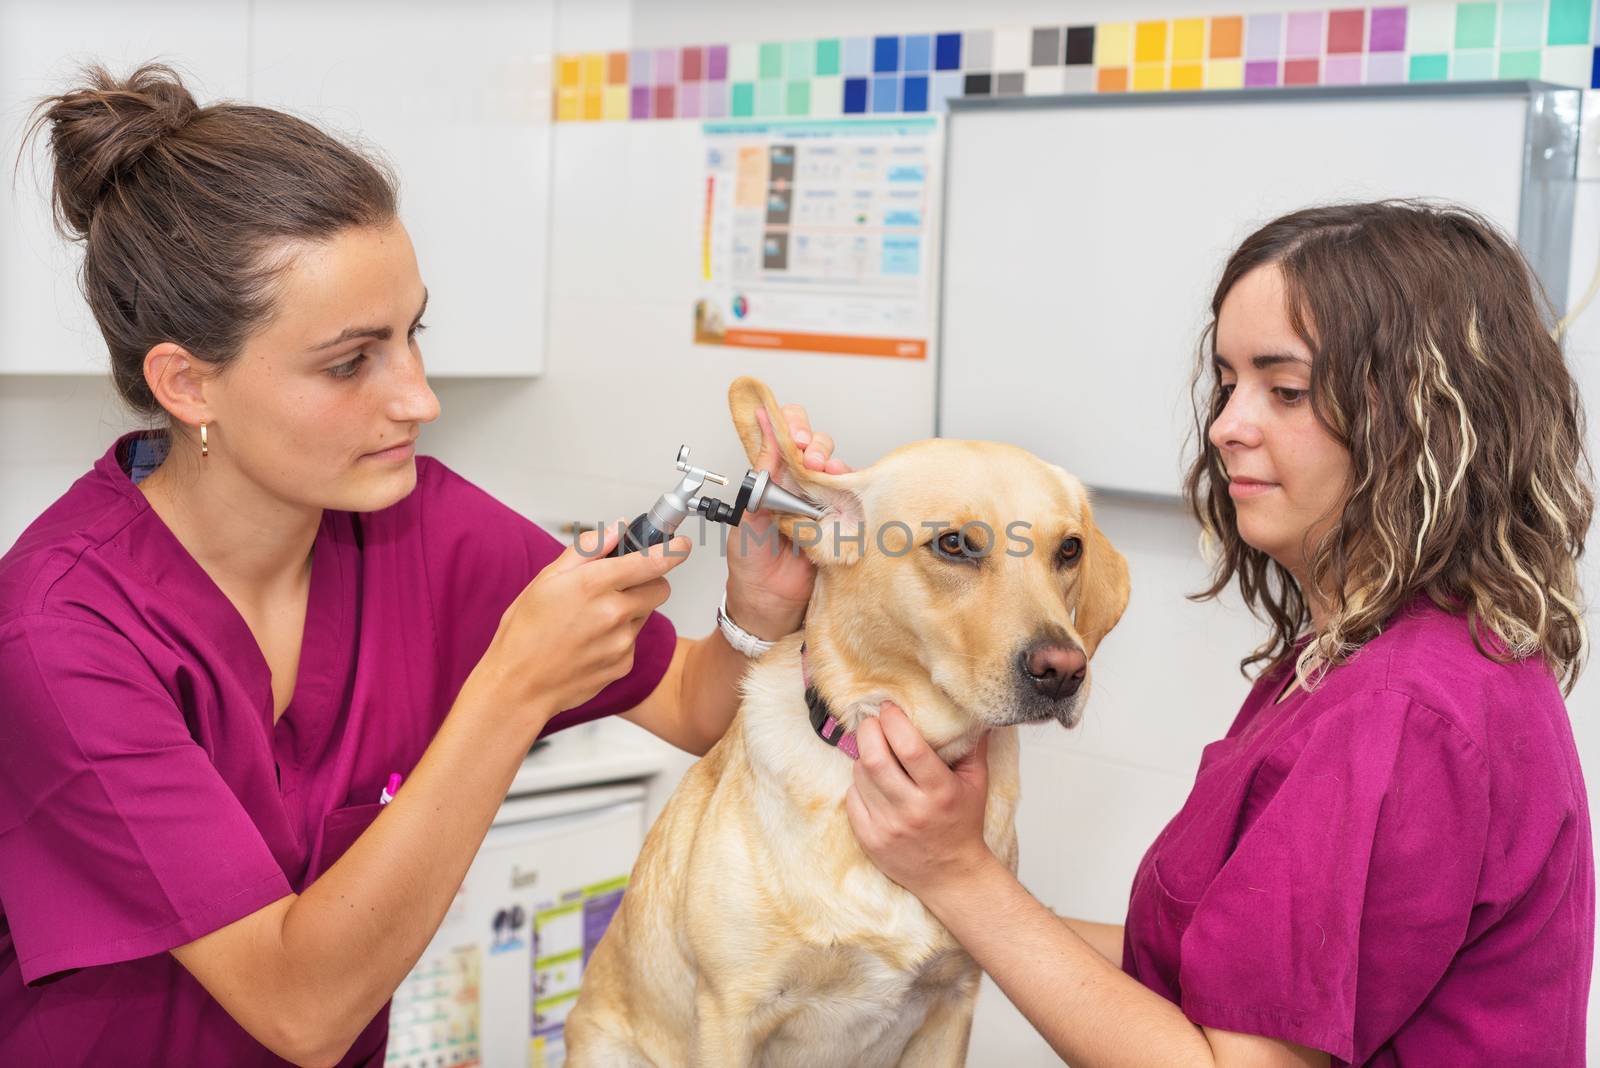 Hearing checkup of a dog in veterinary clinic by HERRAEZ